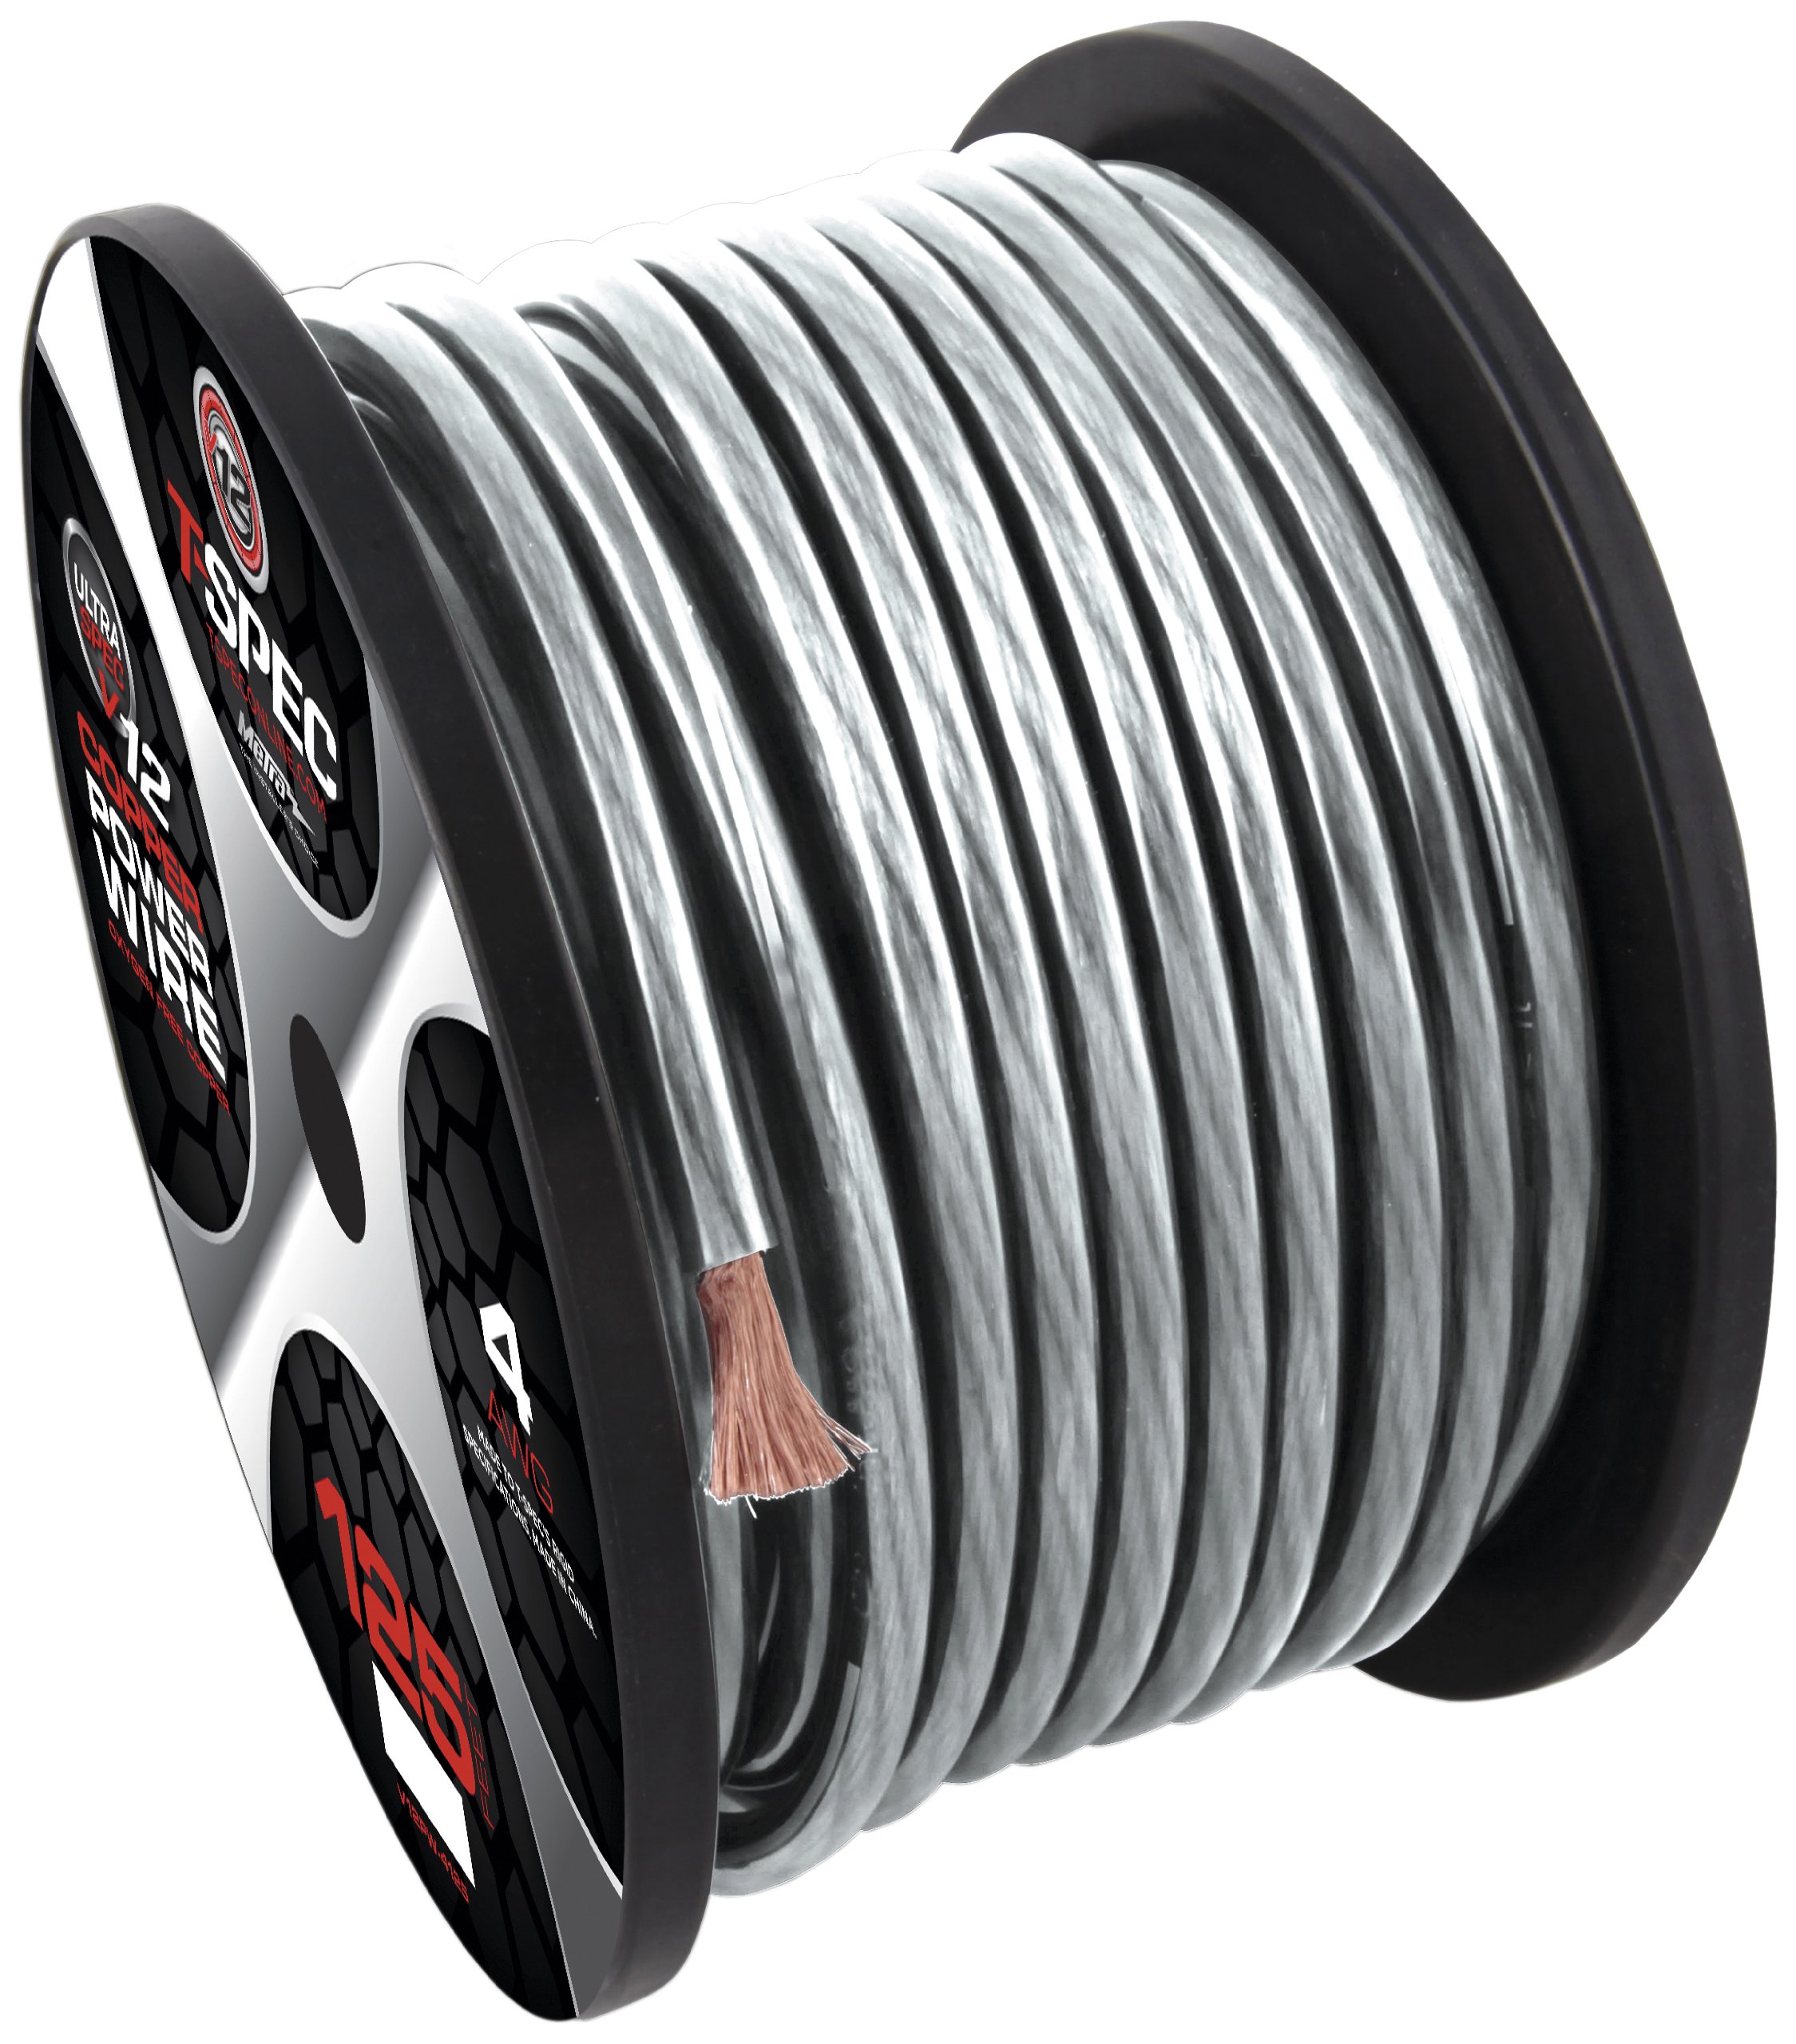 8 AWG 250FT MATTE SMOKED OFC POWER WIRE  V12 SERIES